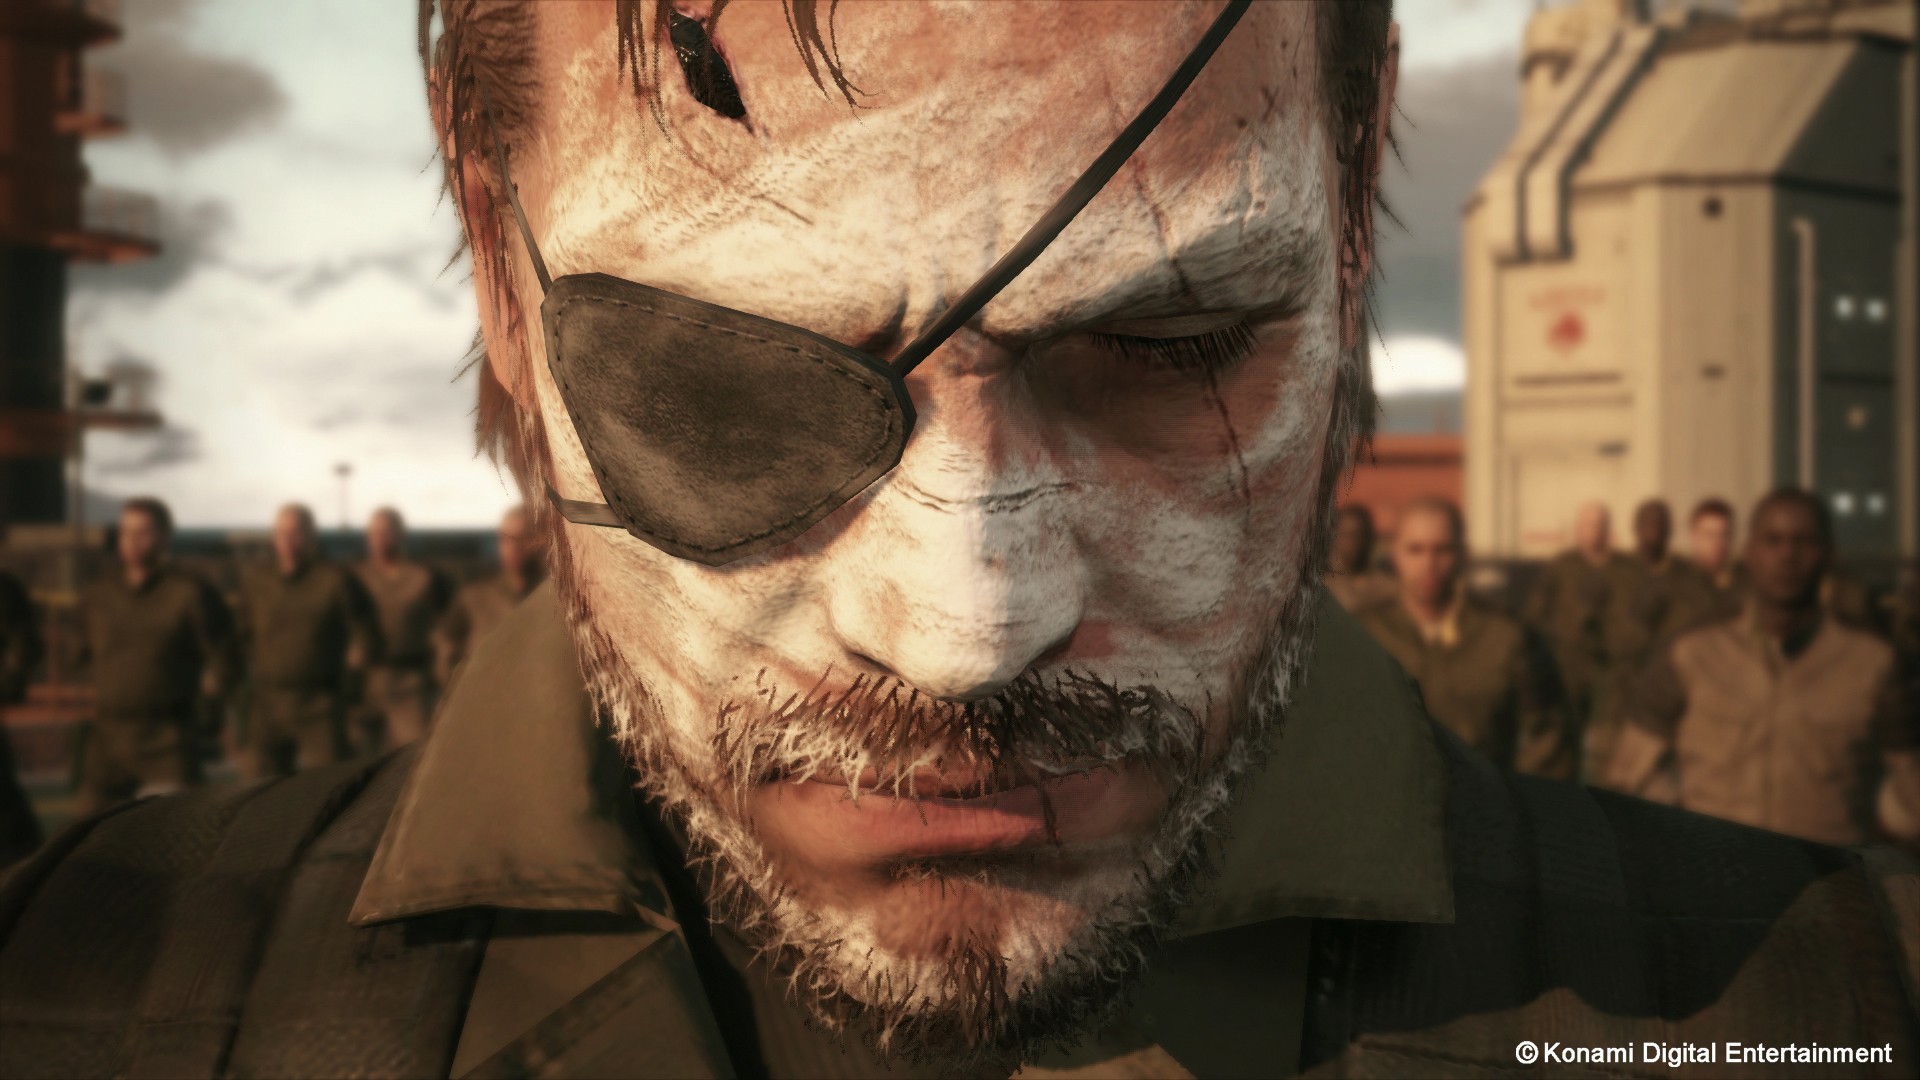 General 1920x1080 Metal Gear Solid V: The Phantom Pain video games Metal Gear Venom Snake Metal Gear Solid face video game characters video game men konami eyepatches